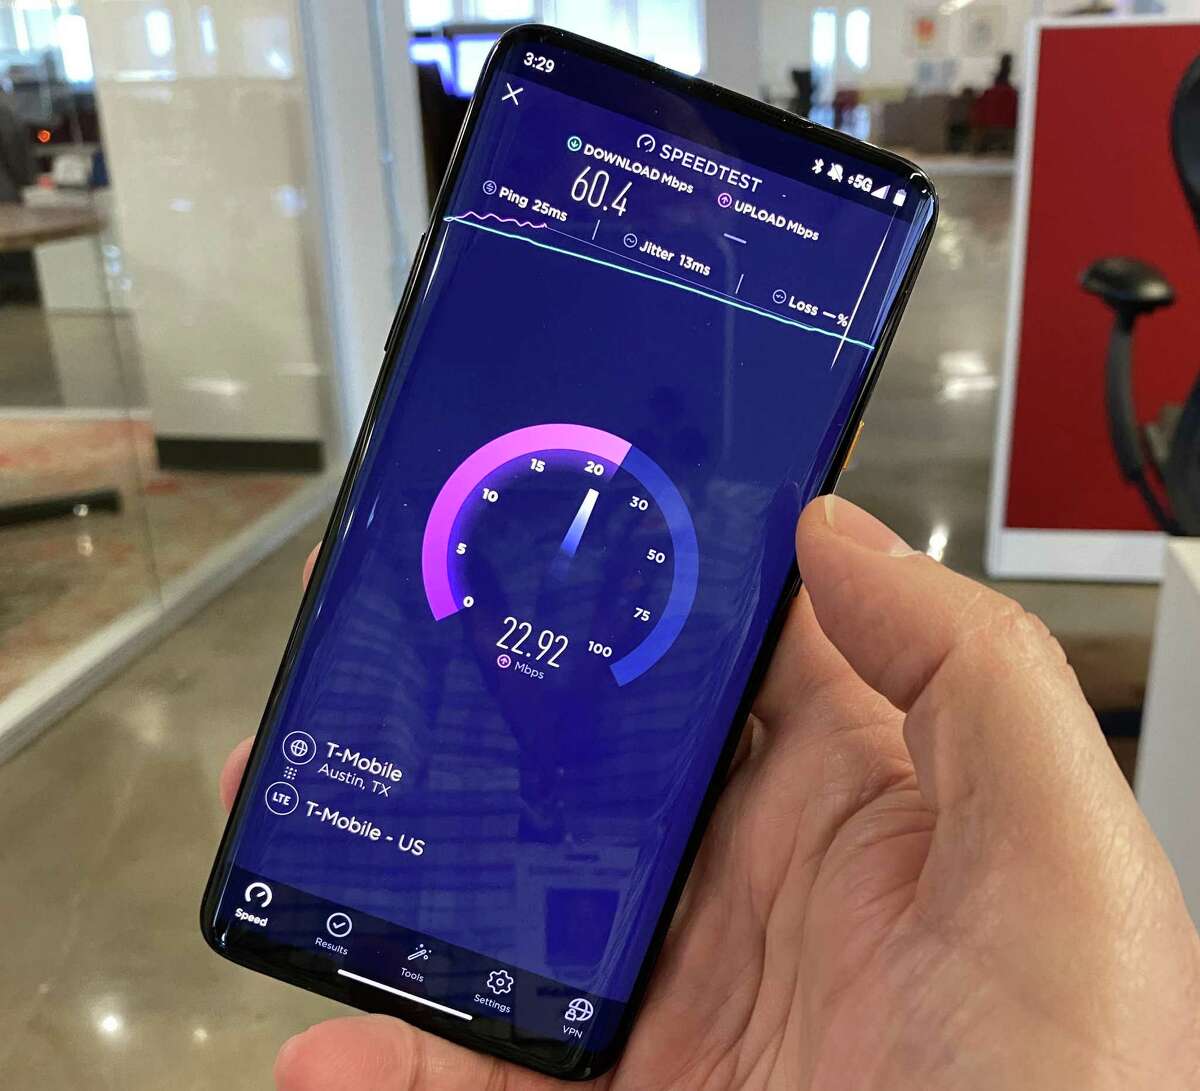 T-Mobile says its 5G speeds are about 20 percent faster than those of 4G LTE.